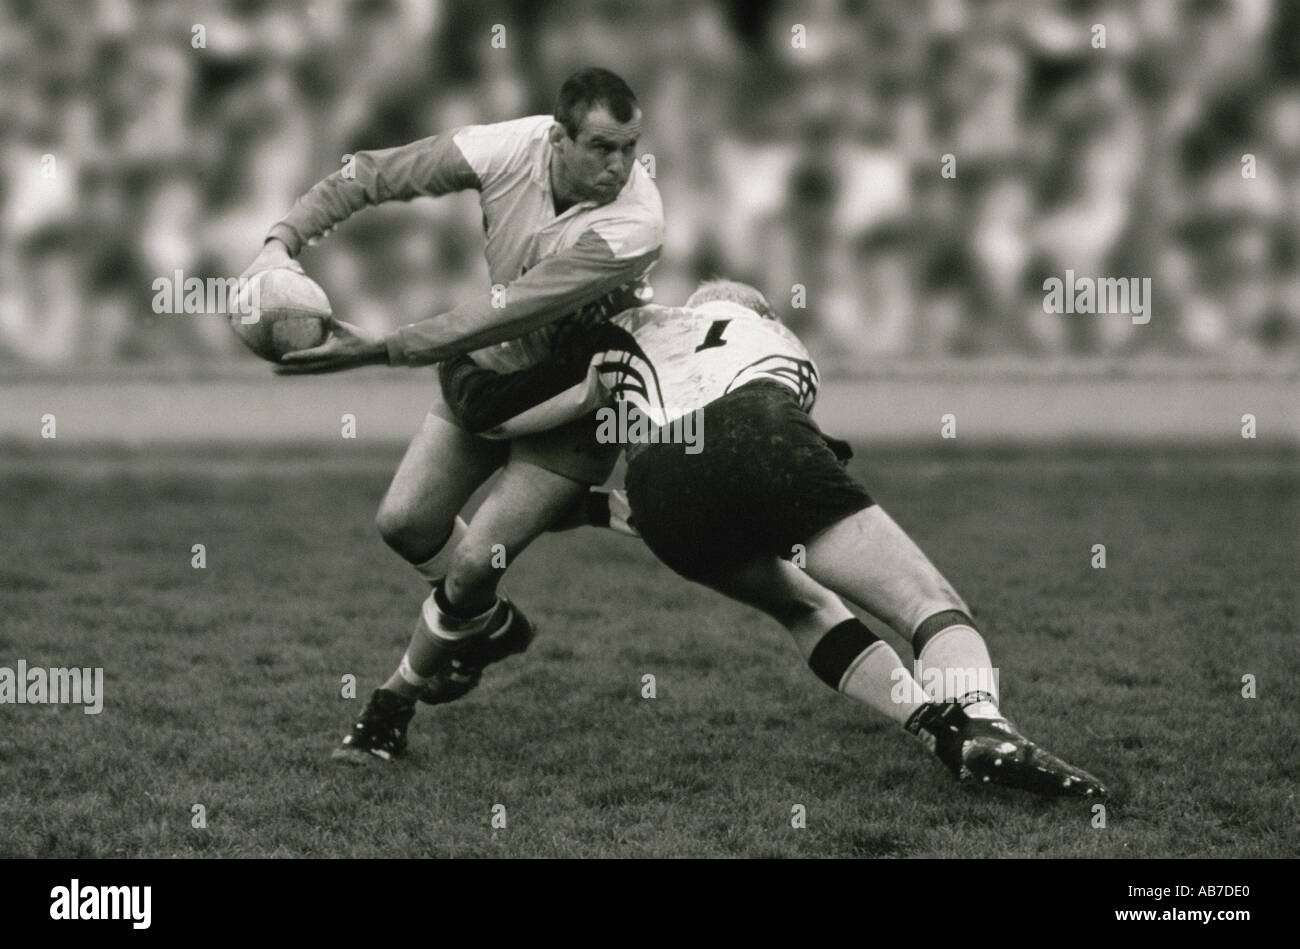 Rugby tackle Stock Photo